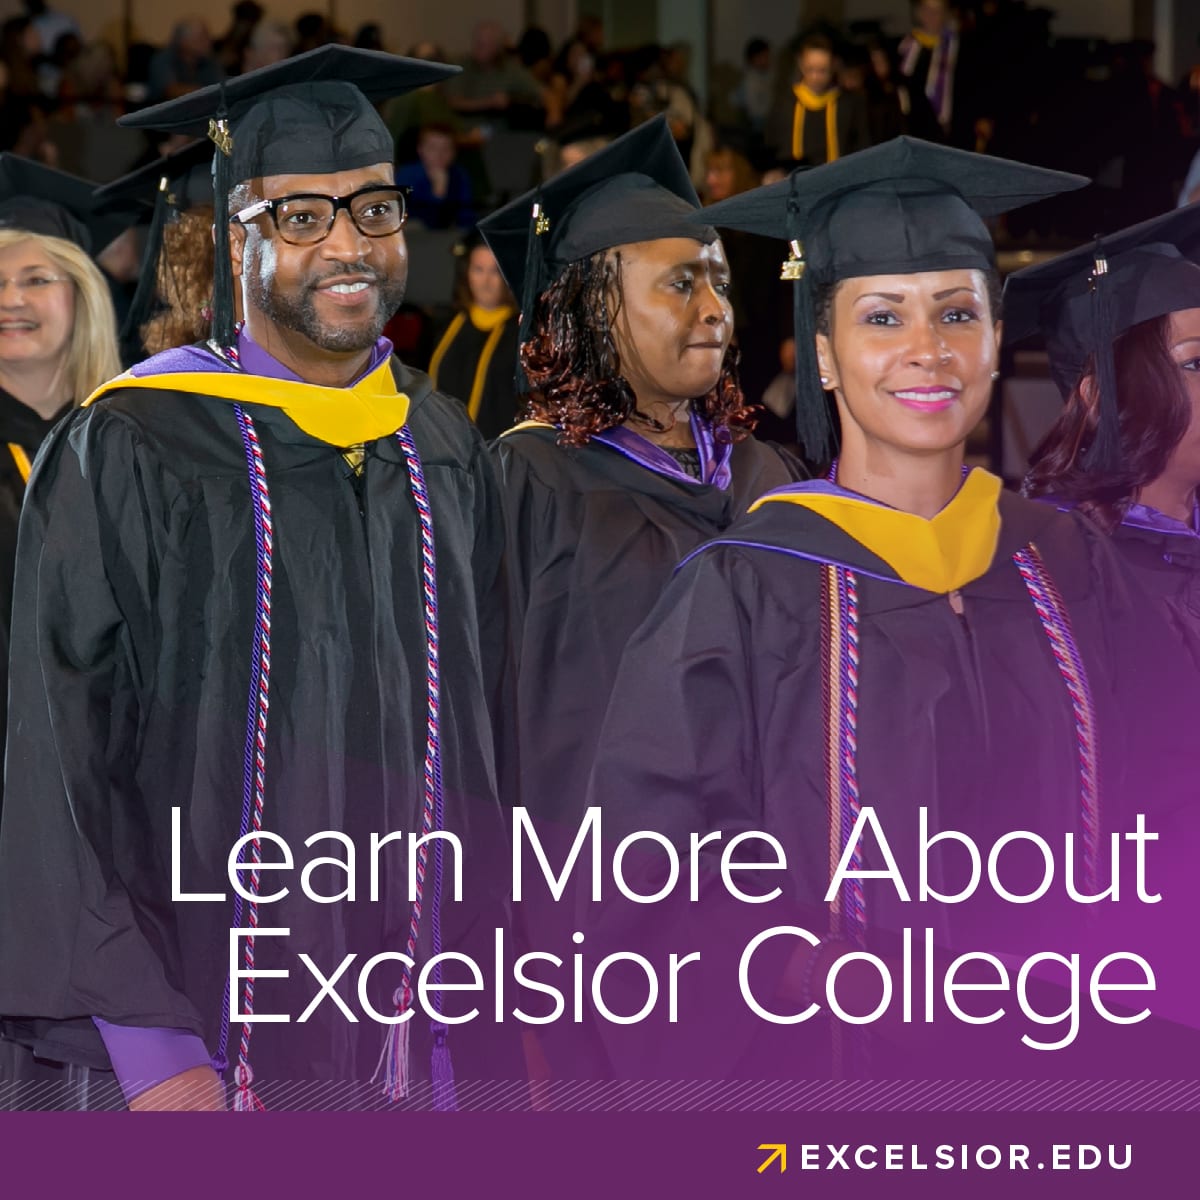 Learn more about Excelsior College